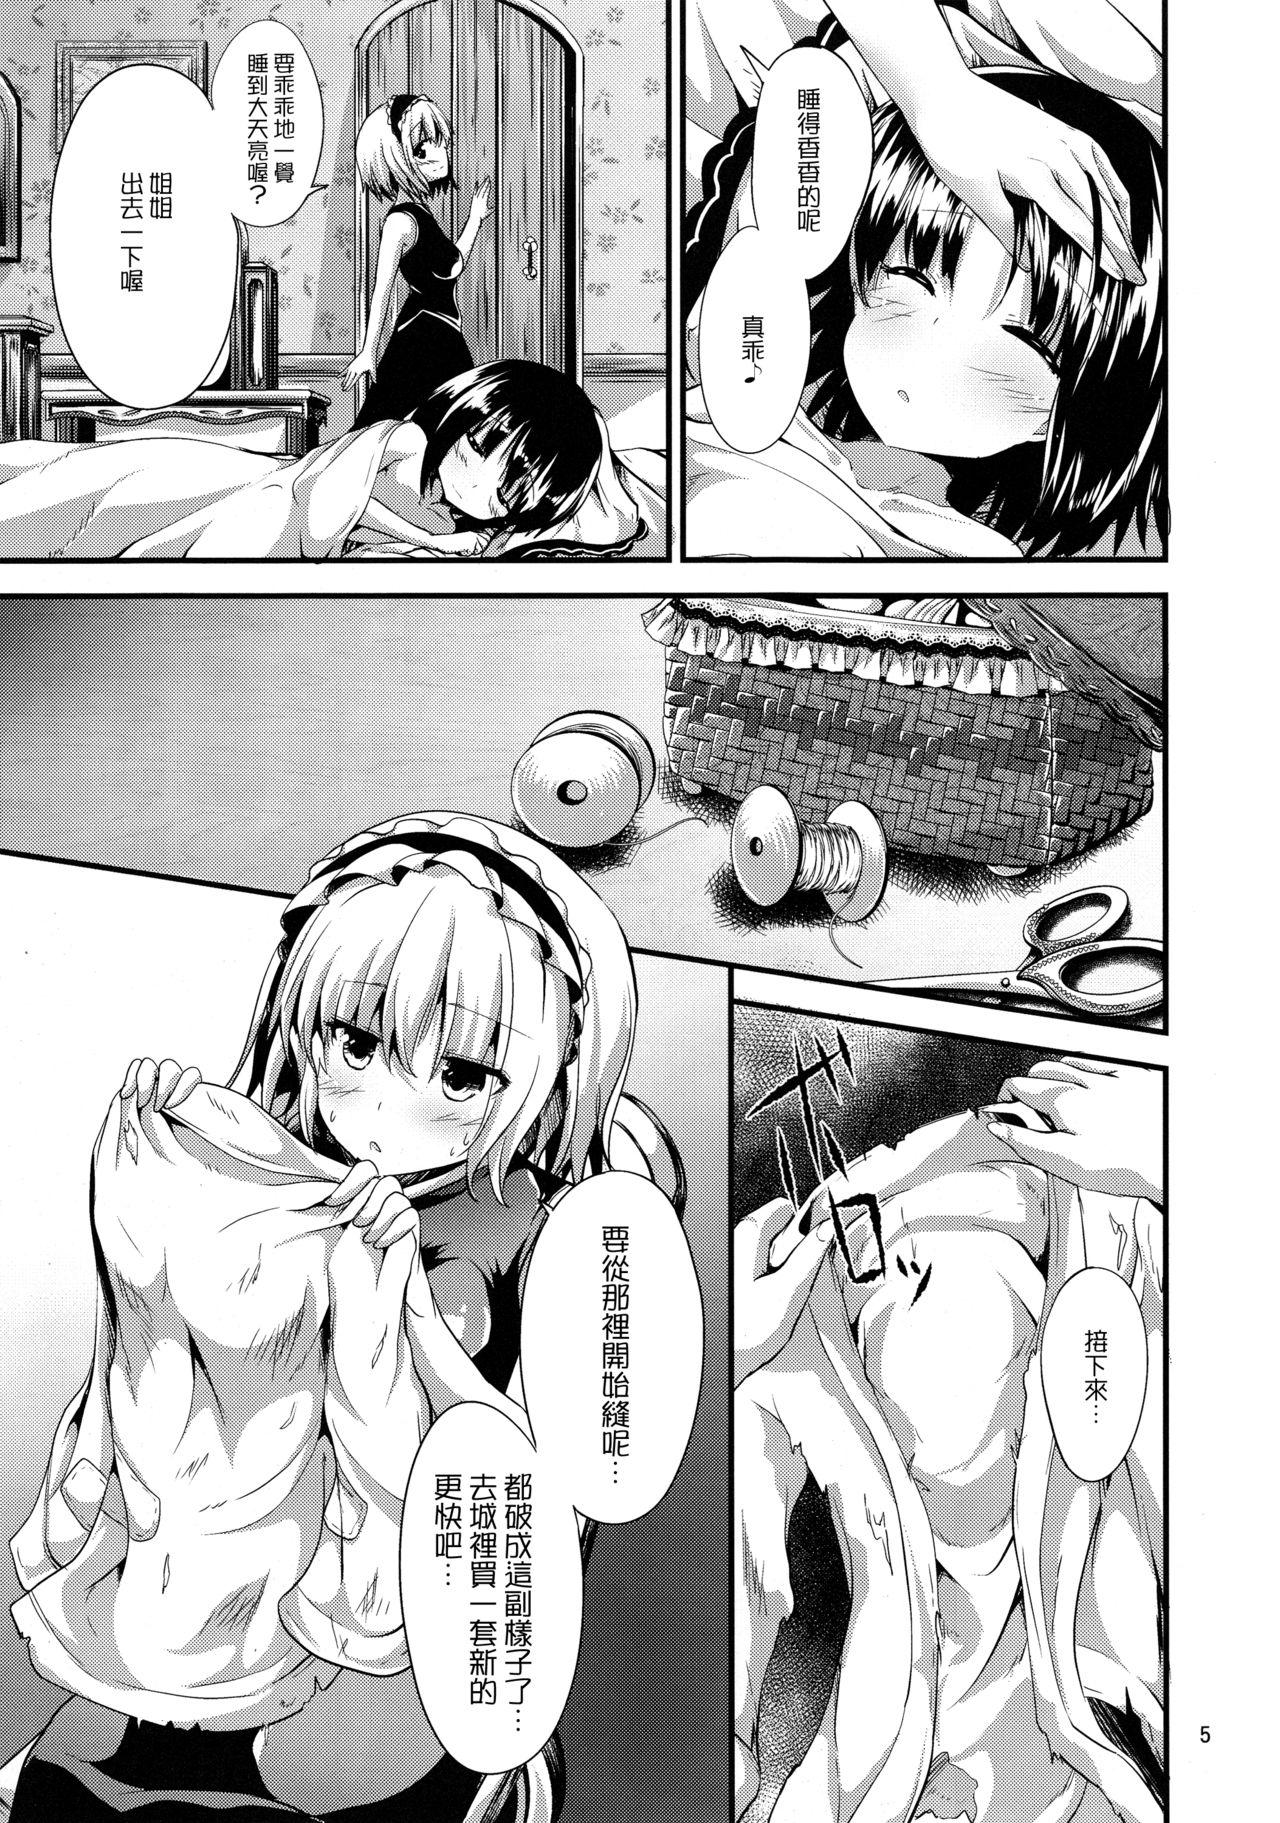 18 Year Old Porn Candy House 2 - Touhou project Adult Toys - Page 5